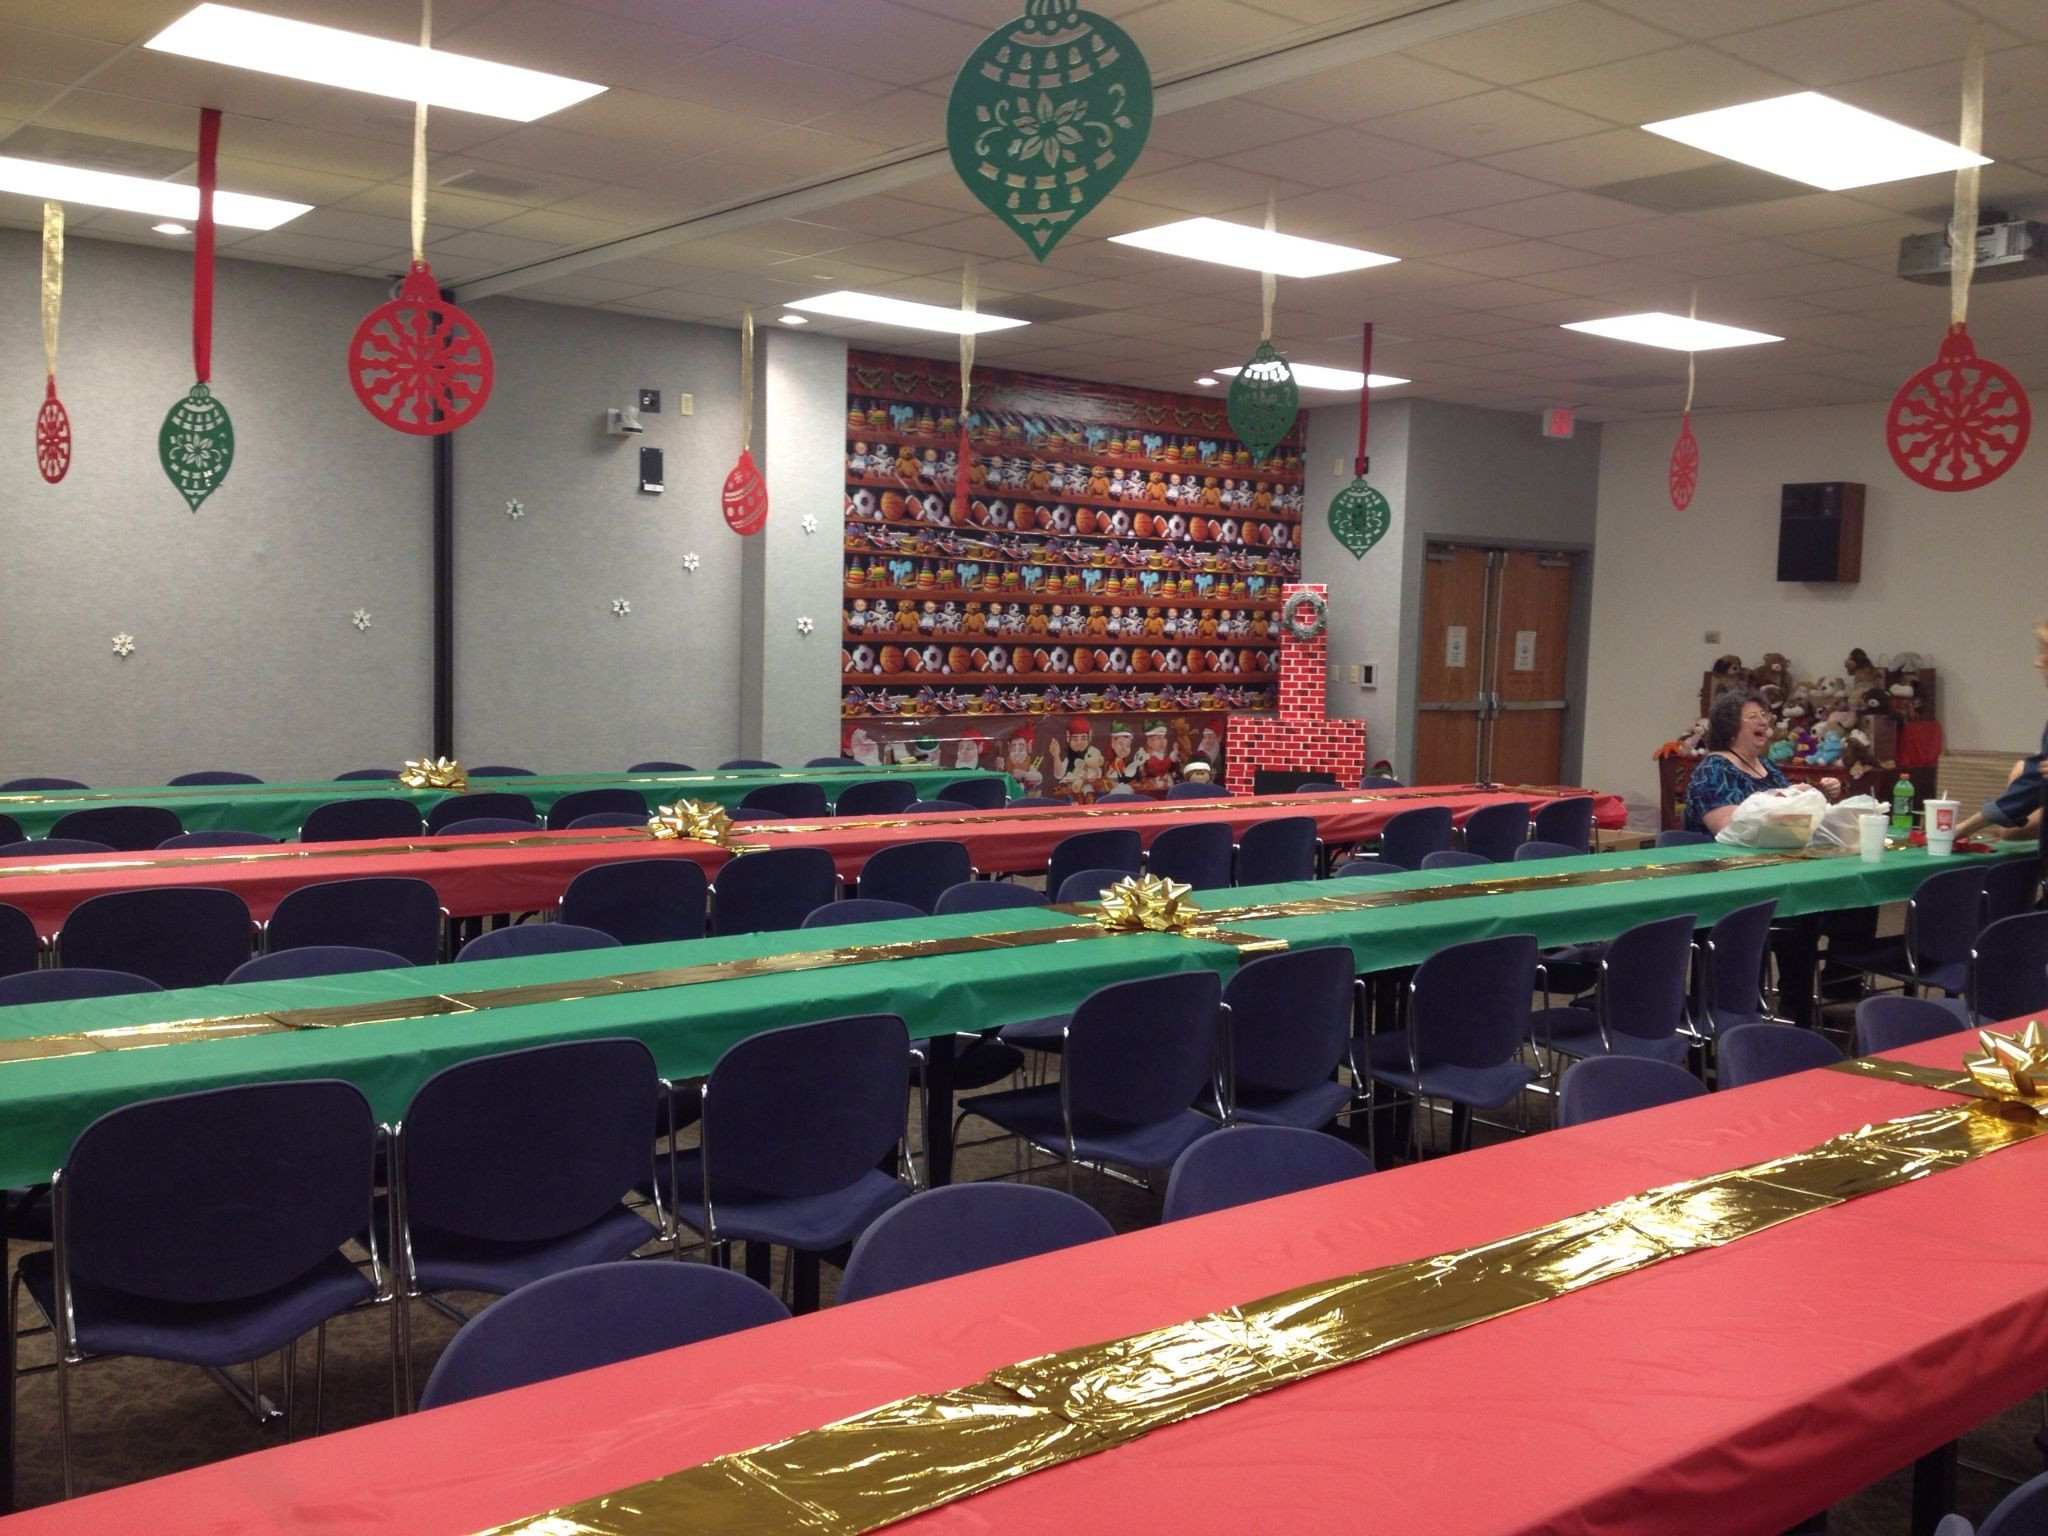 Holiday Office Party Ideas
 fice Christmas party decorations Holidays